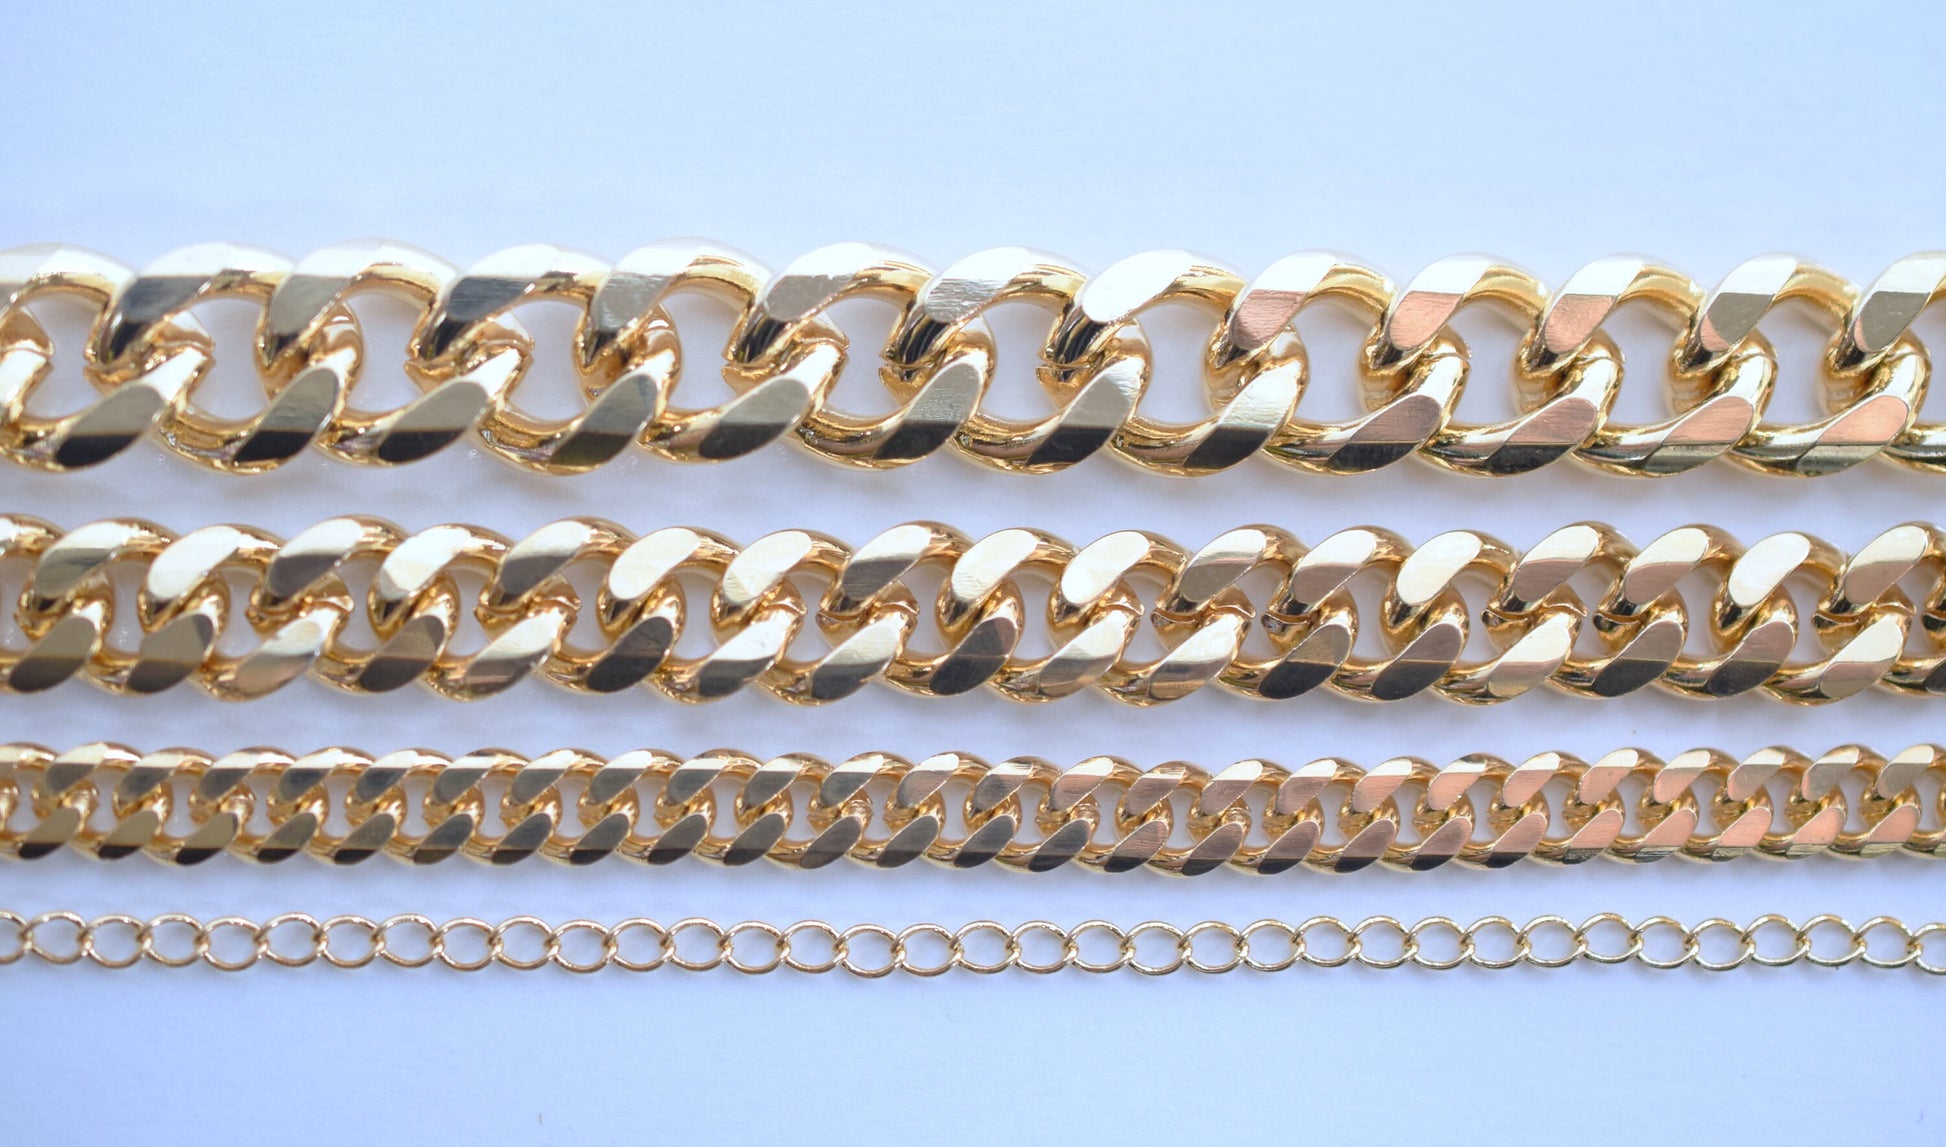 Gold Filled EP Cuban Chain Flat and Extension different sizes 1.3mm/1.6mm/2mm/2.8mm/3mm/4.3mm/6mm/9mm/11.5mm personalize necklace /wholesale